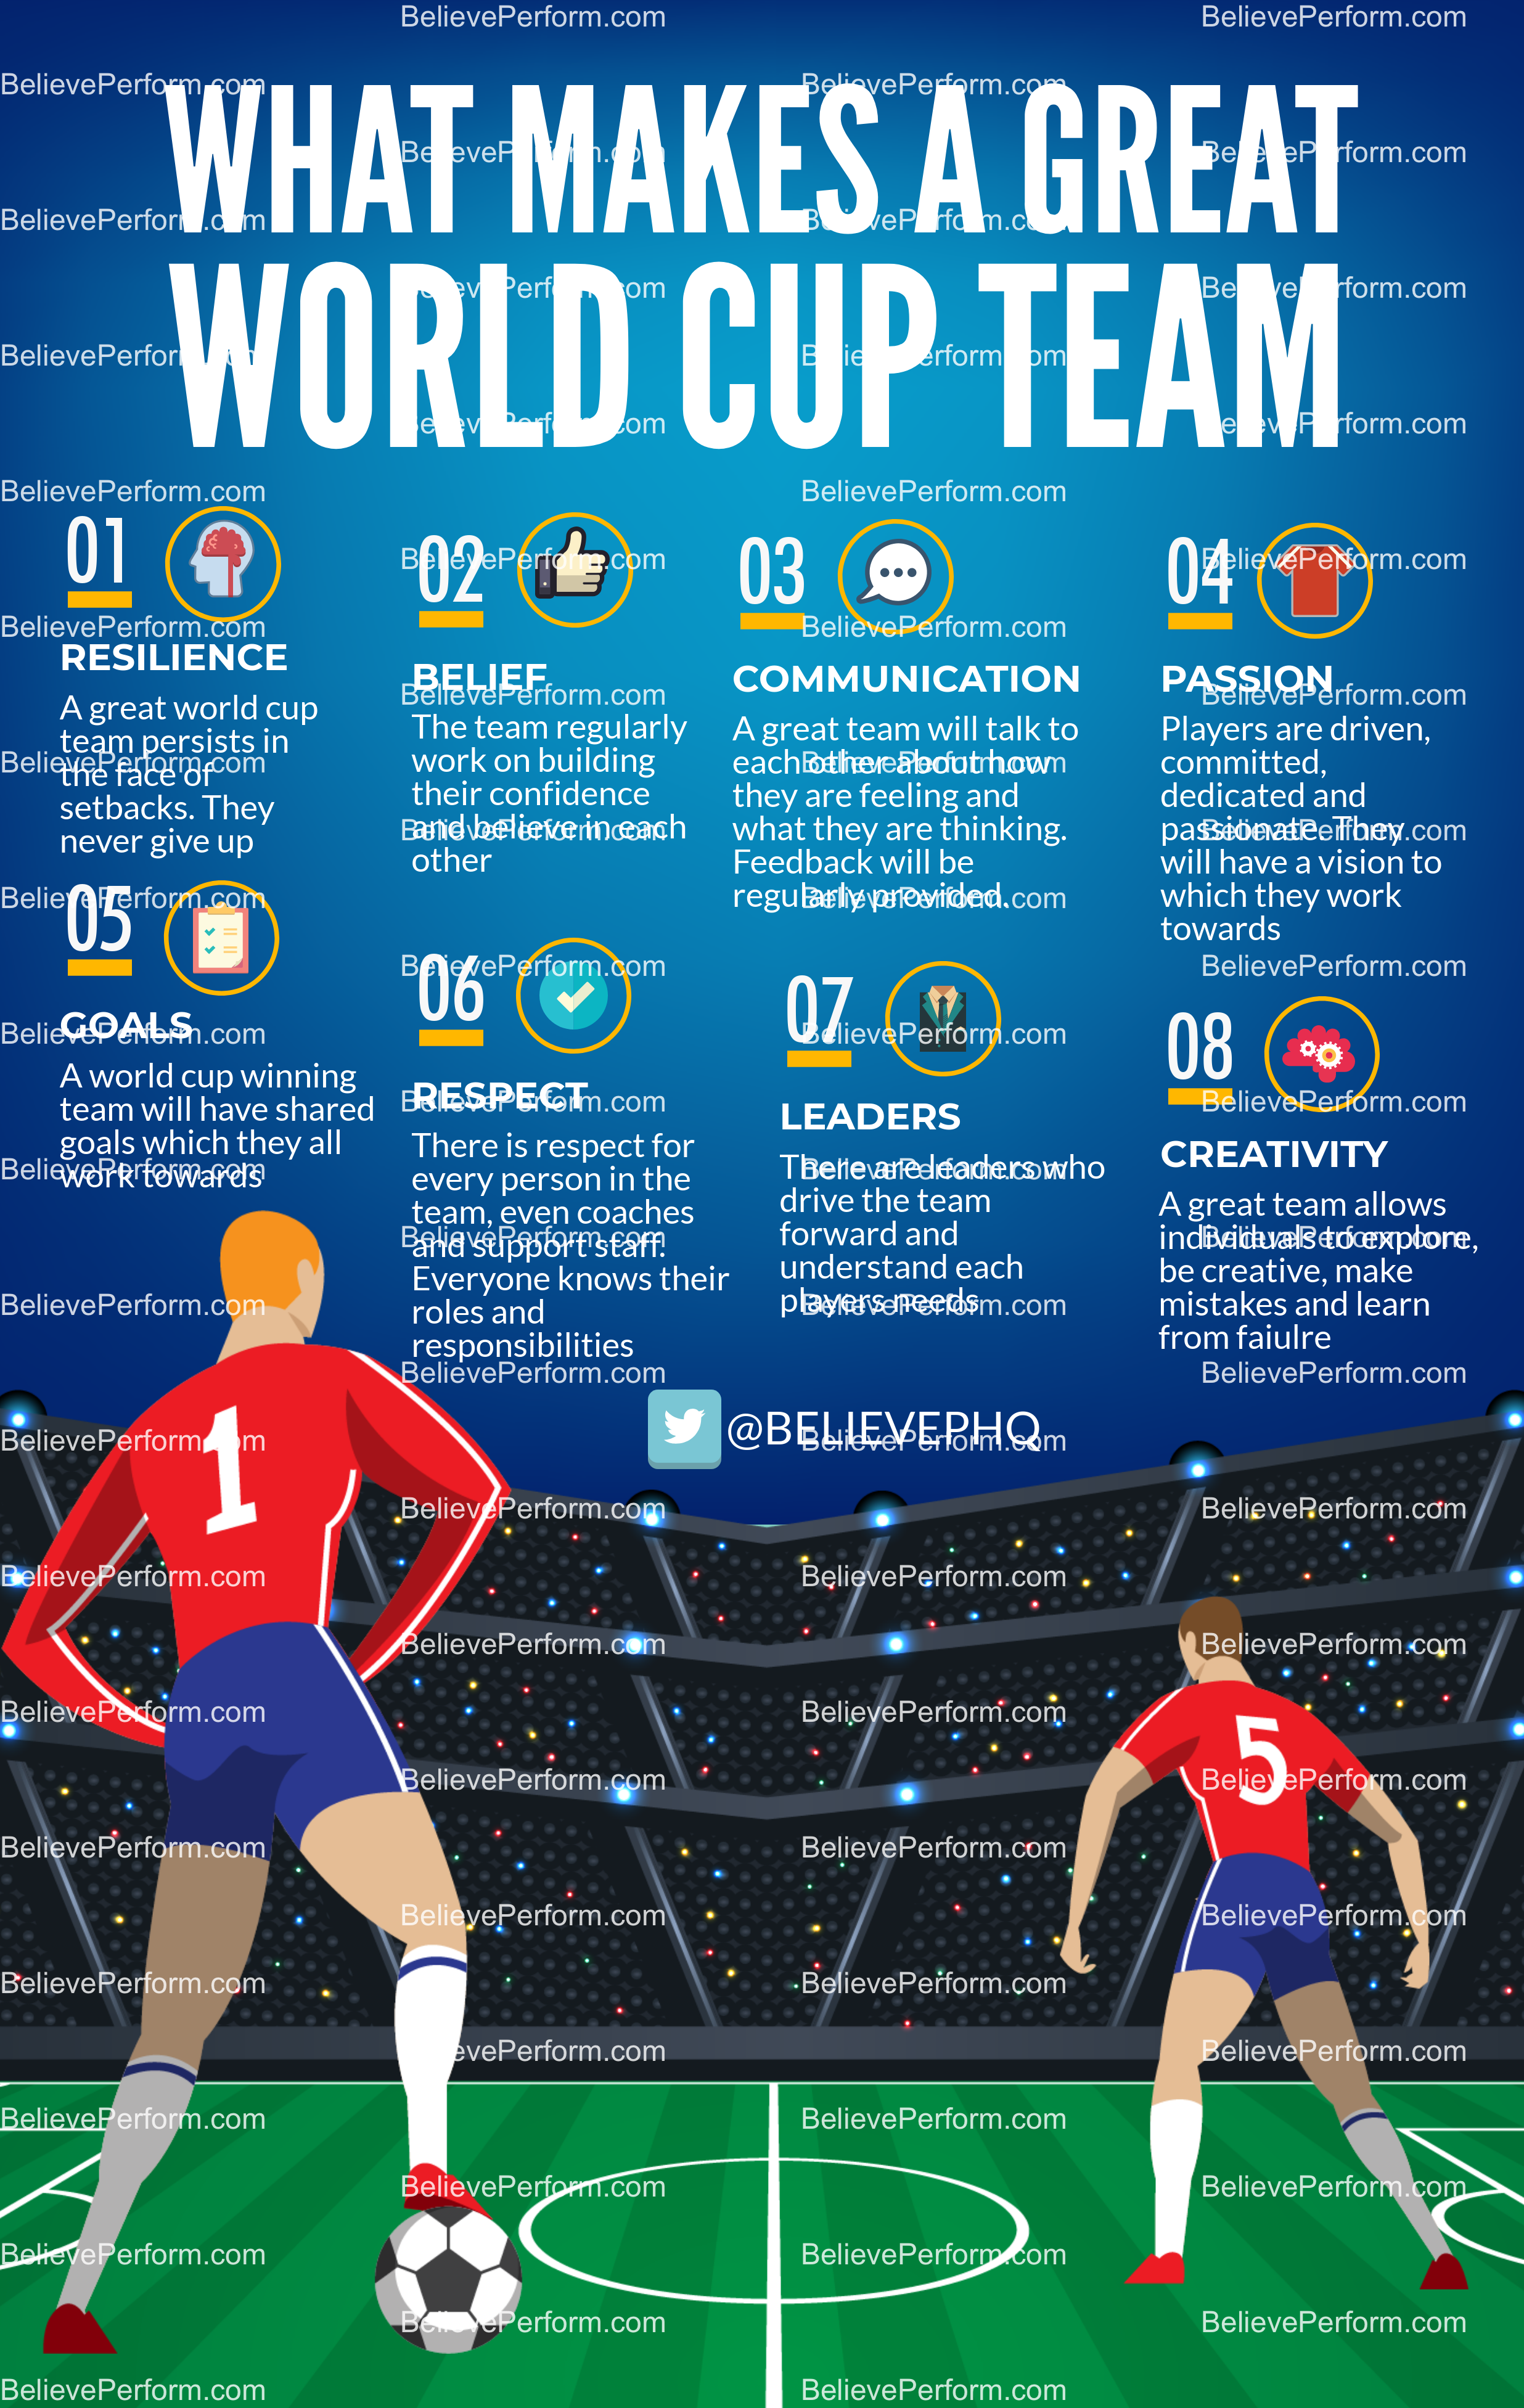 What makes a great world cup team - BelievePerform